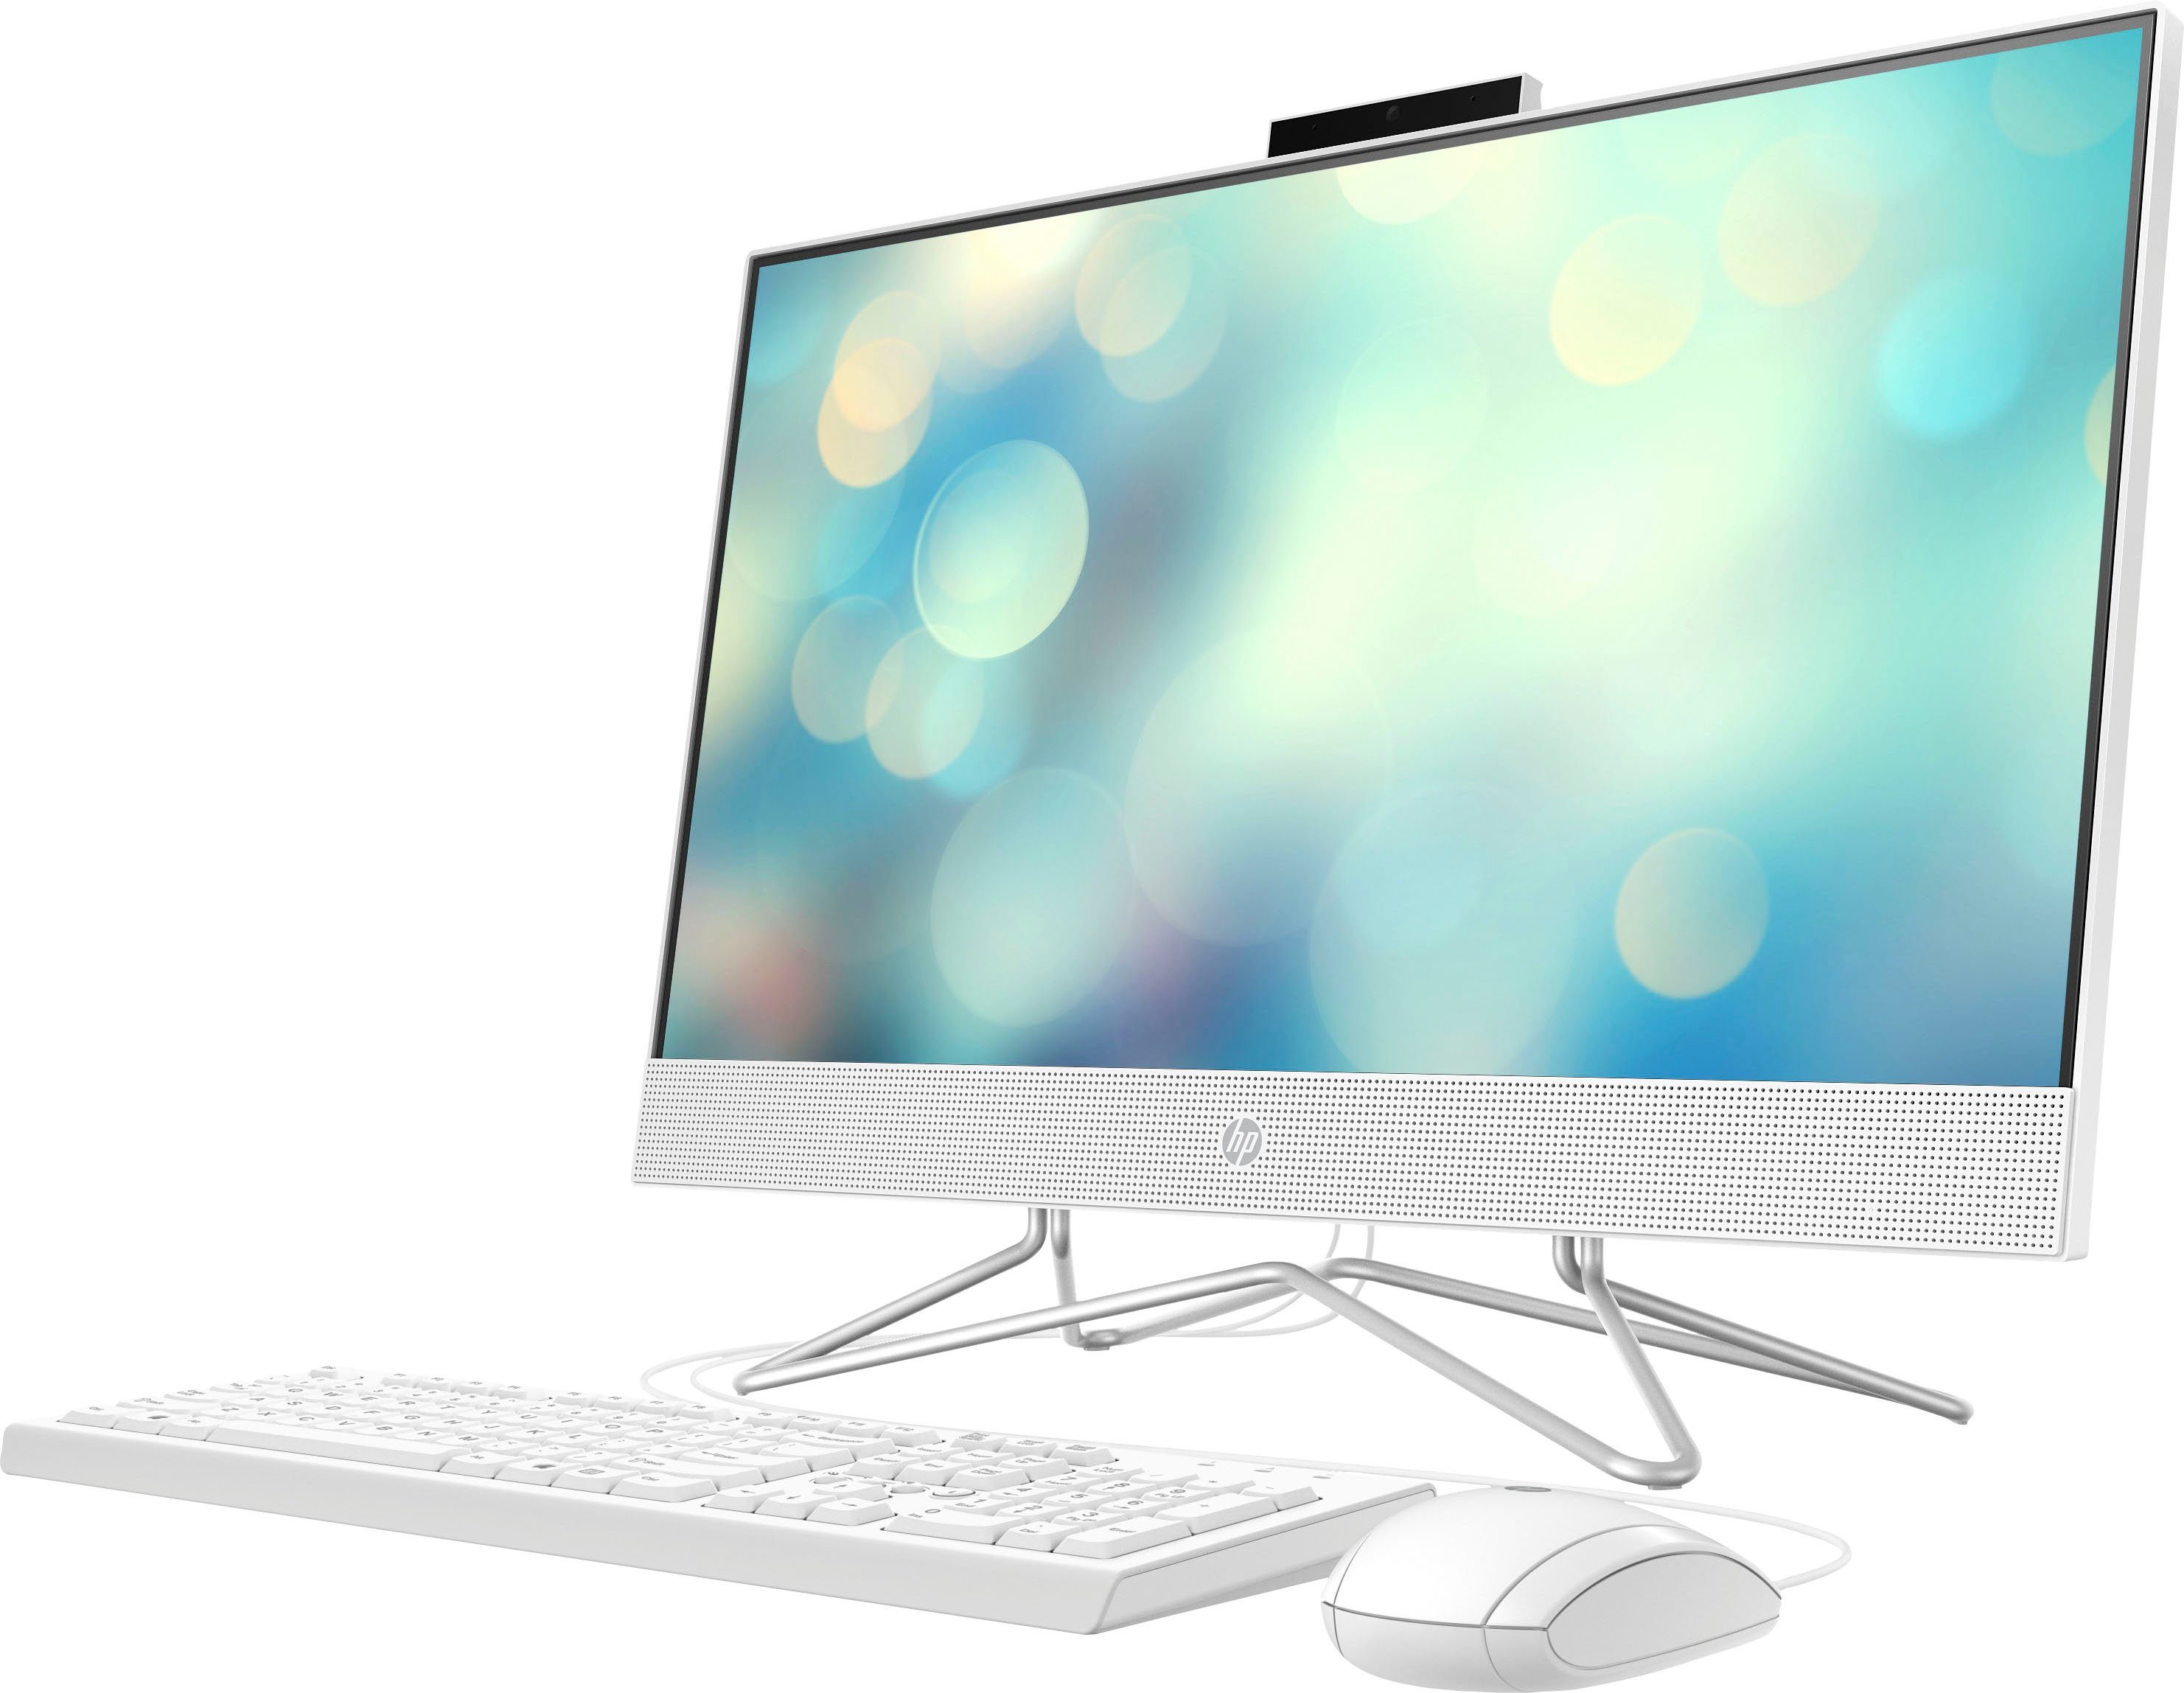 HP 24-df0200ng All-in-One PC Graphics 4 RAM, SSD, J4025, Celeron 256 UHD 600, (23,8 Intel® Luftkühlung) GB Zoll, GB